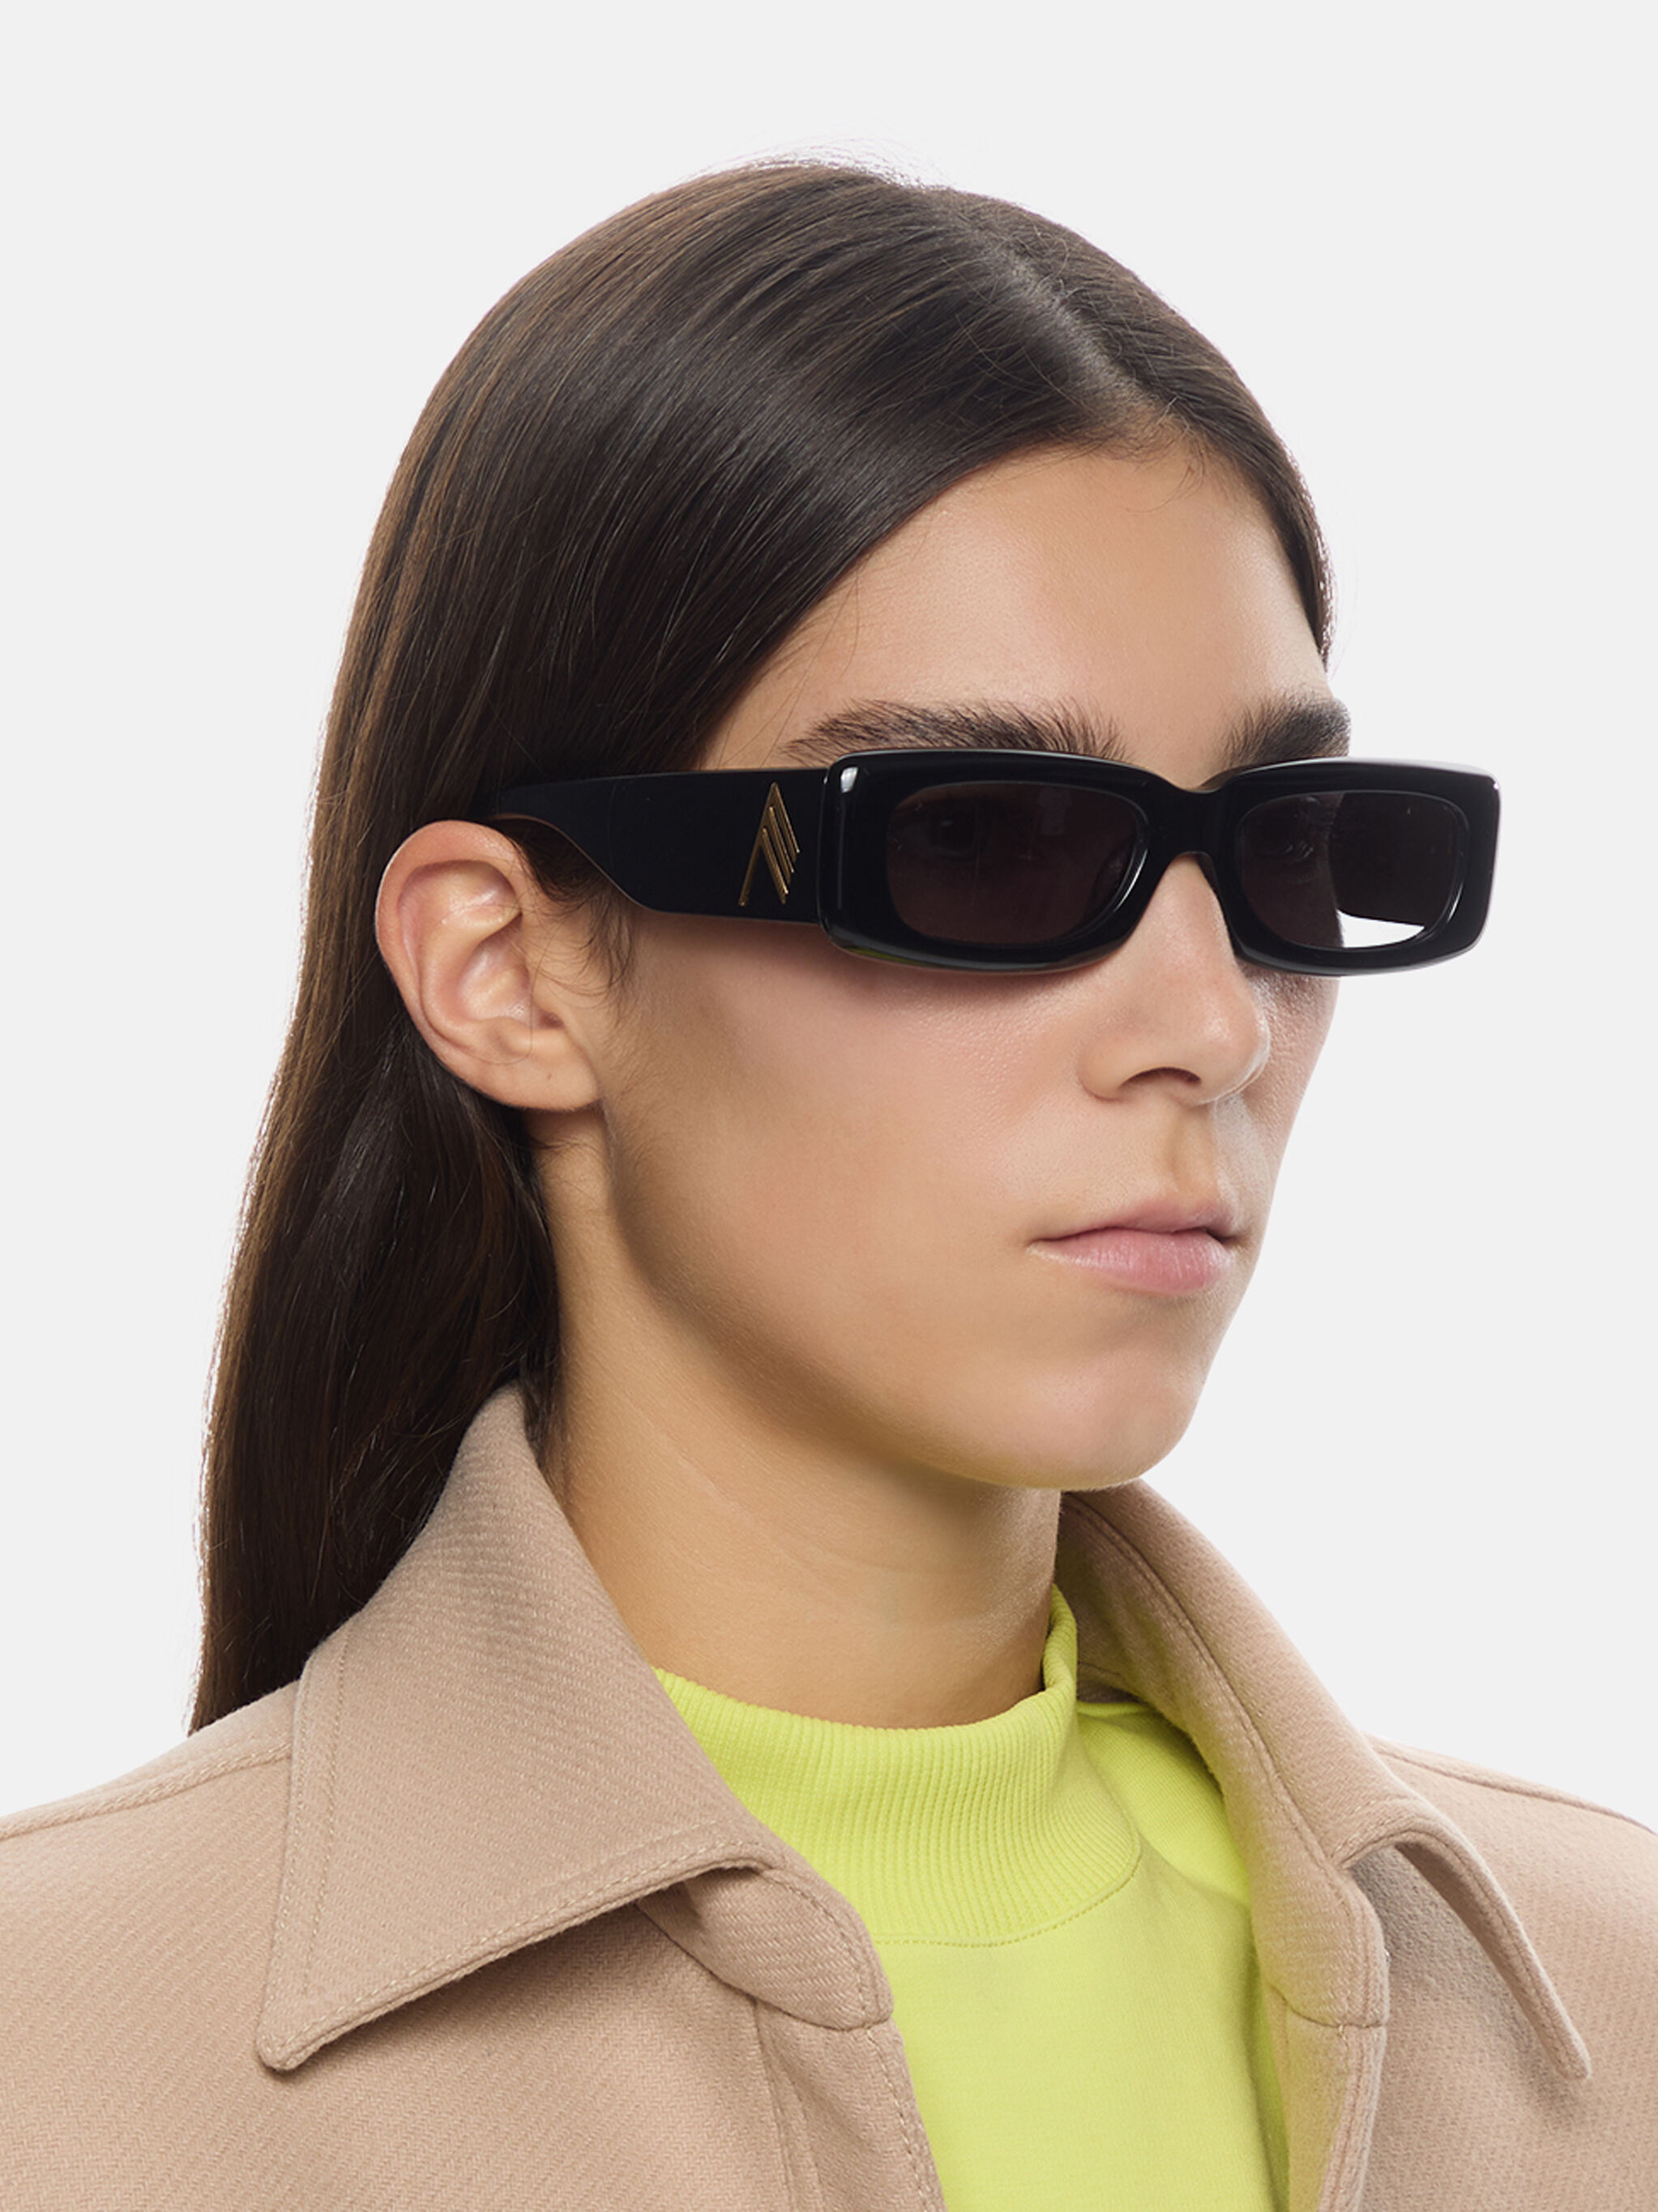 3 Ways to Choose Sunglasses That Go Well with Your Skin Tone